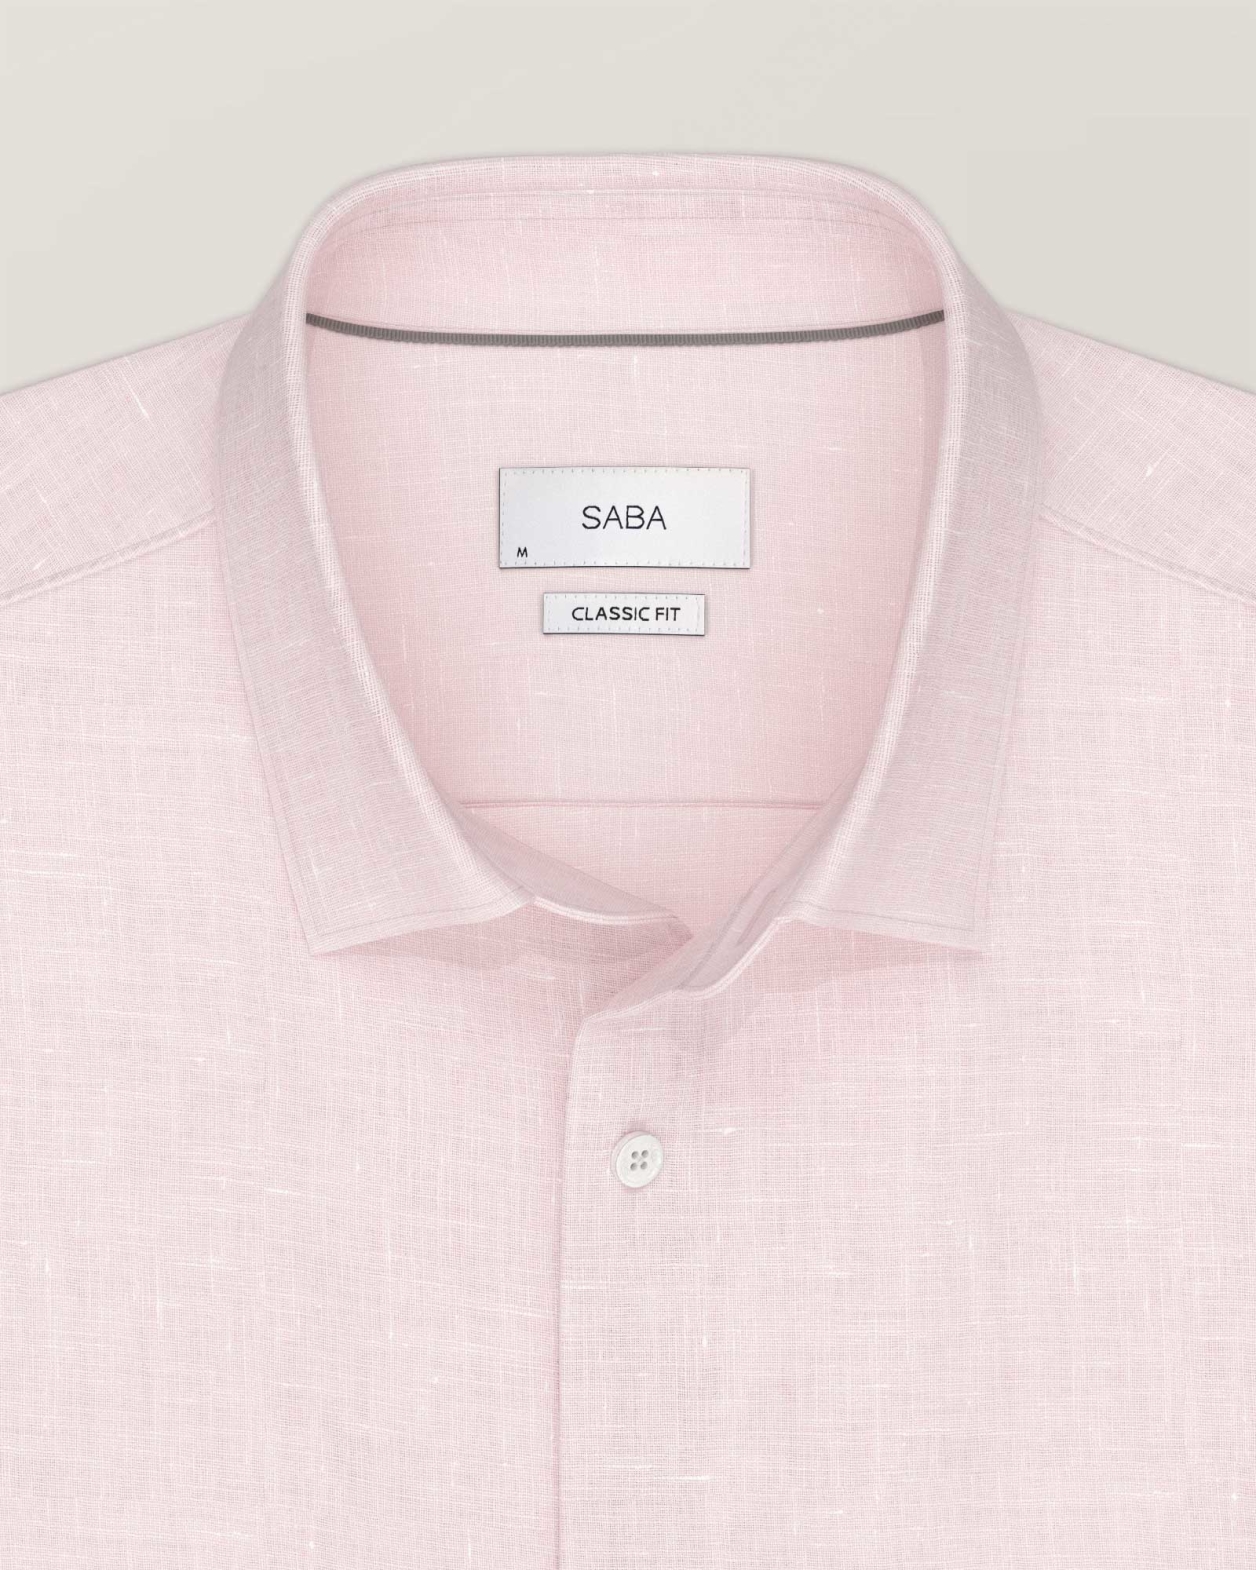 Anderson Long Sleeve Classic Linen Shirt in PINK